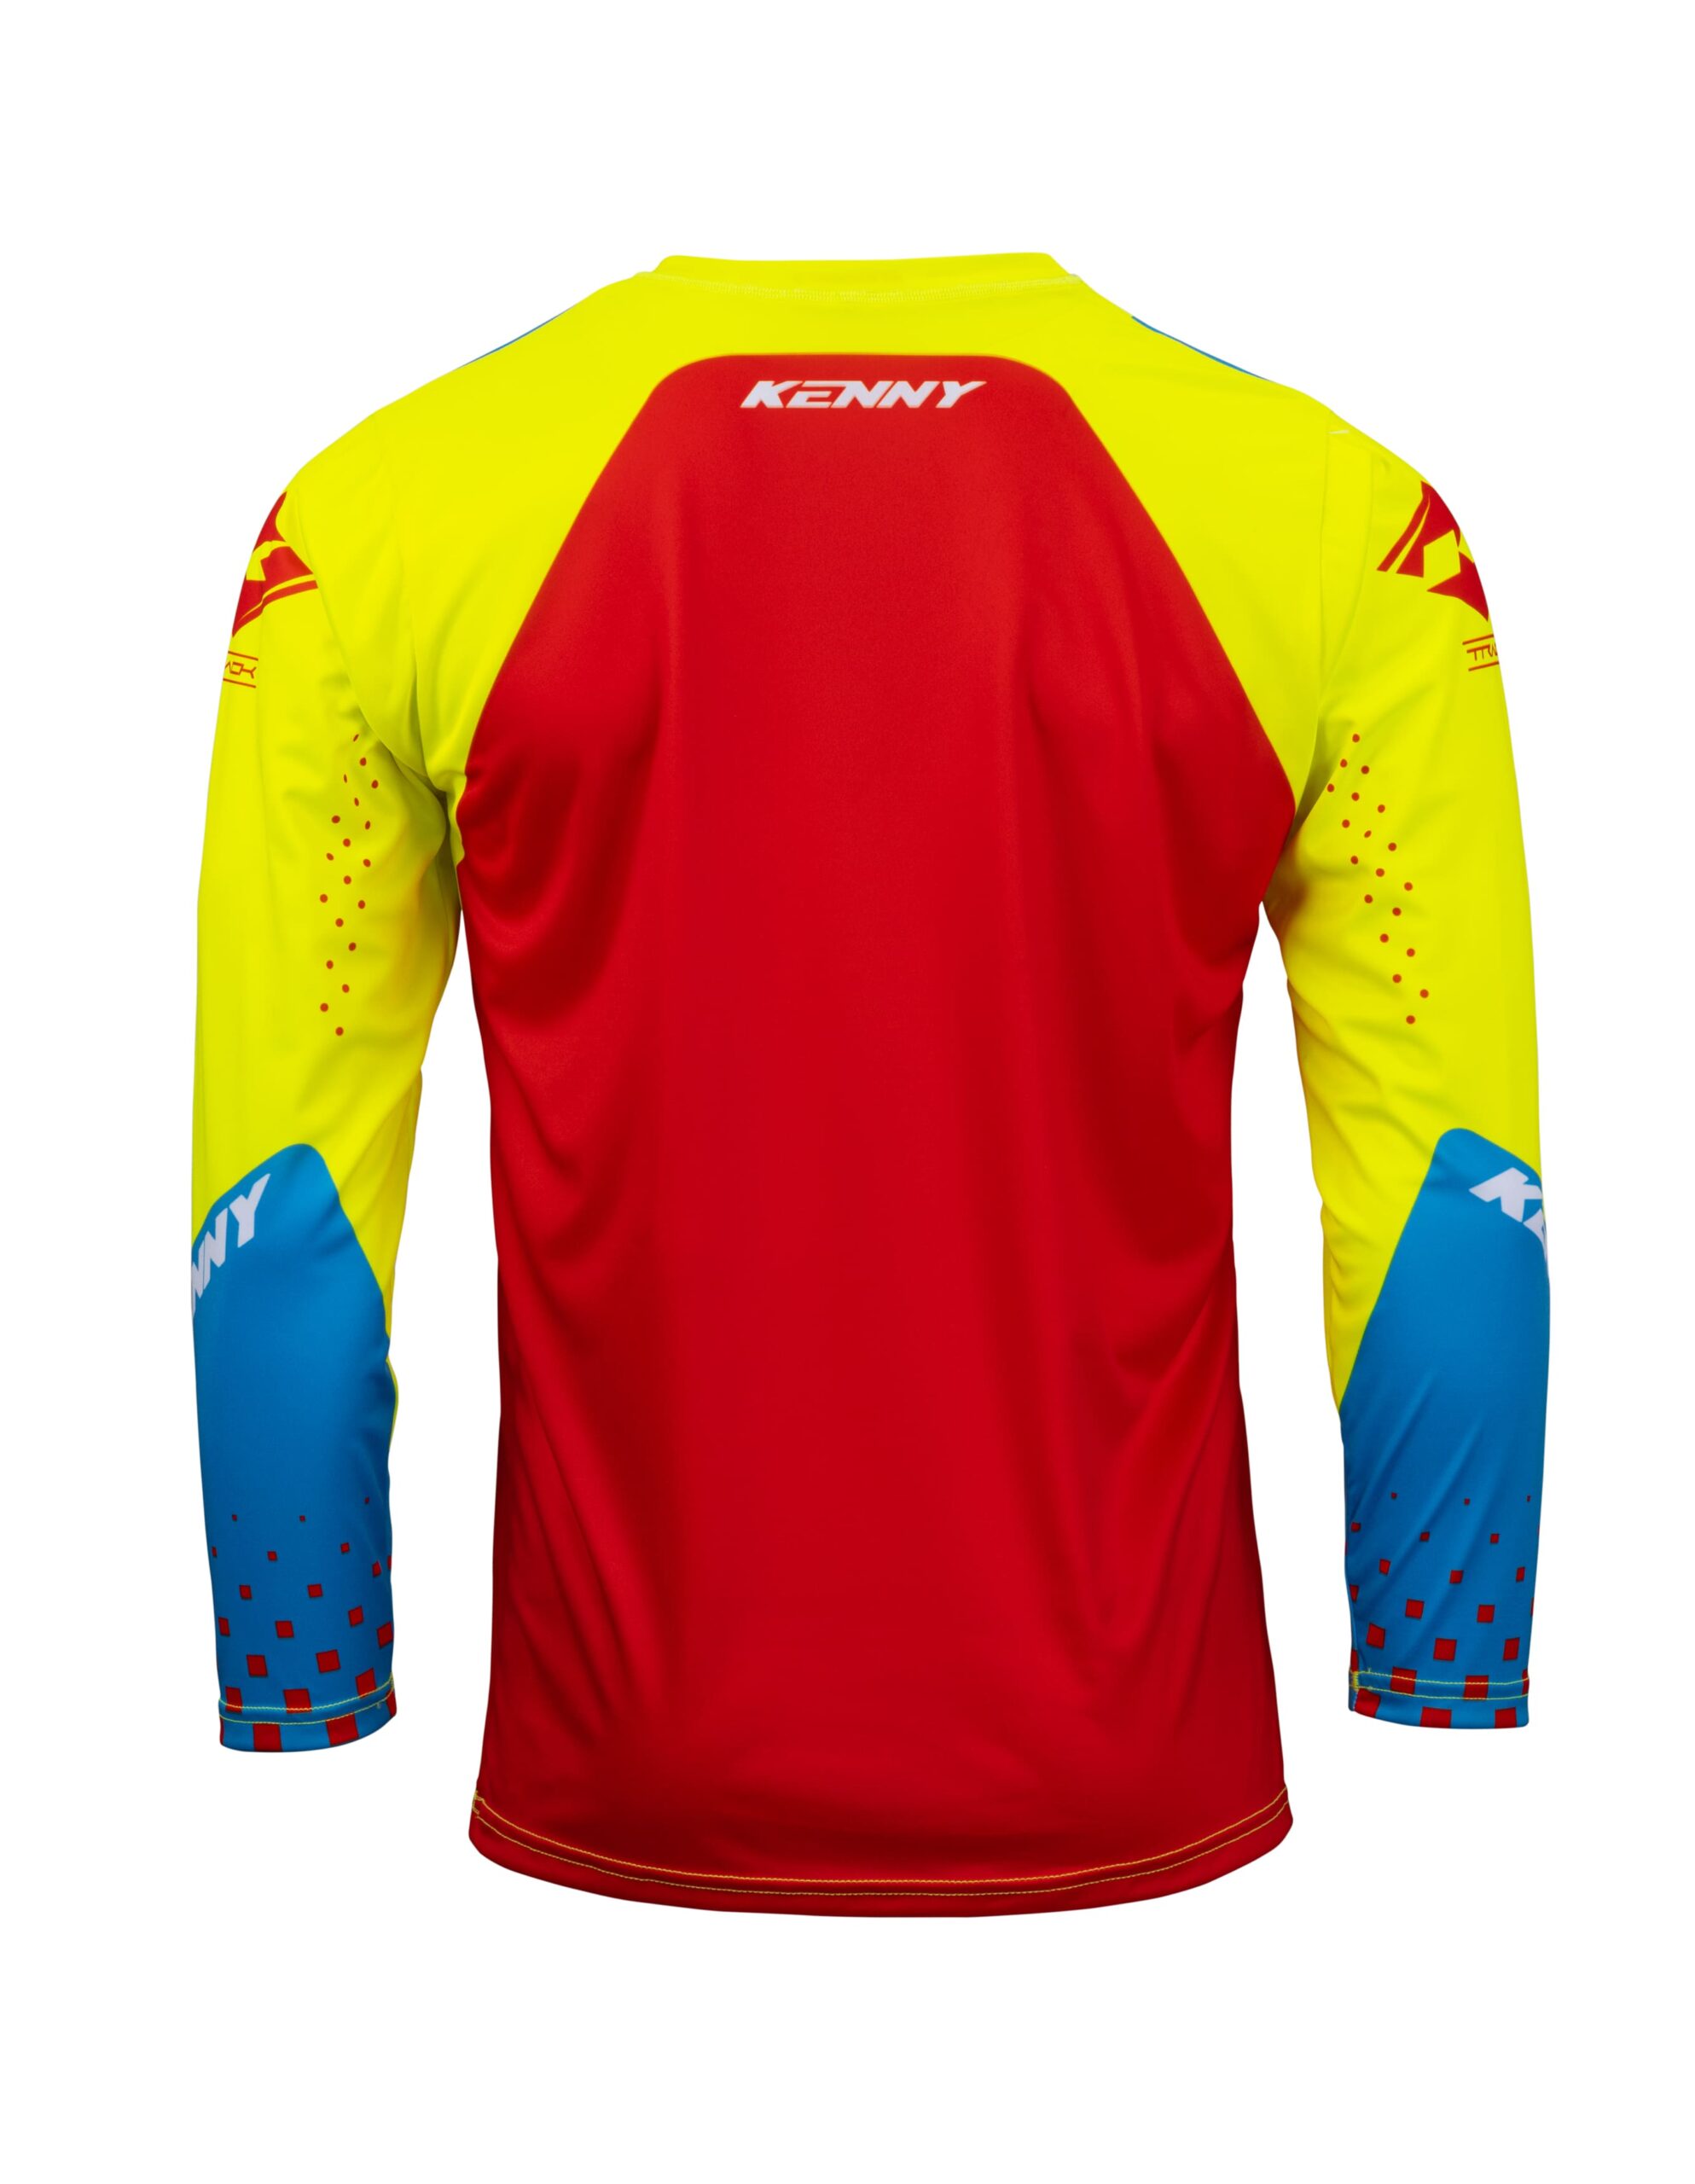 maillot_motocross_kenny_track_focus_neon_yellow_red(15)